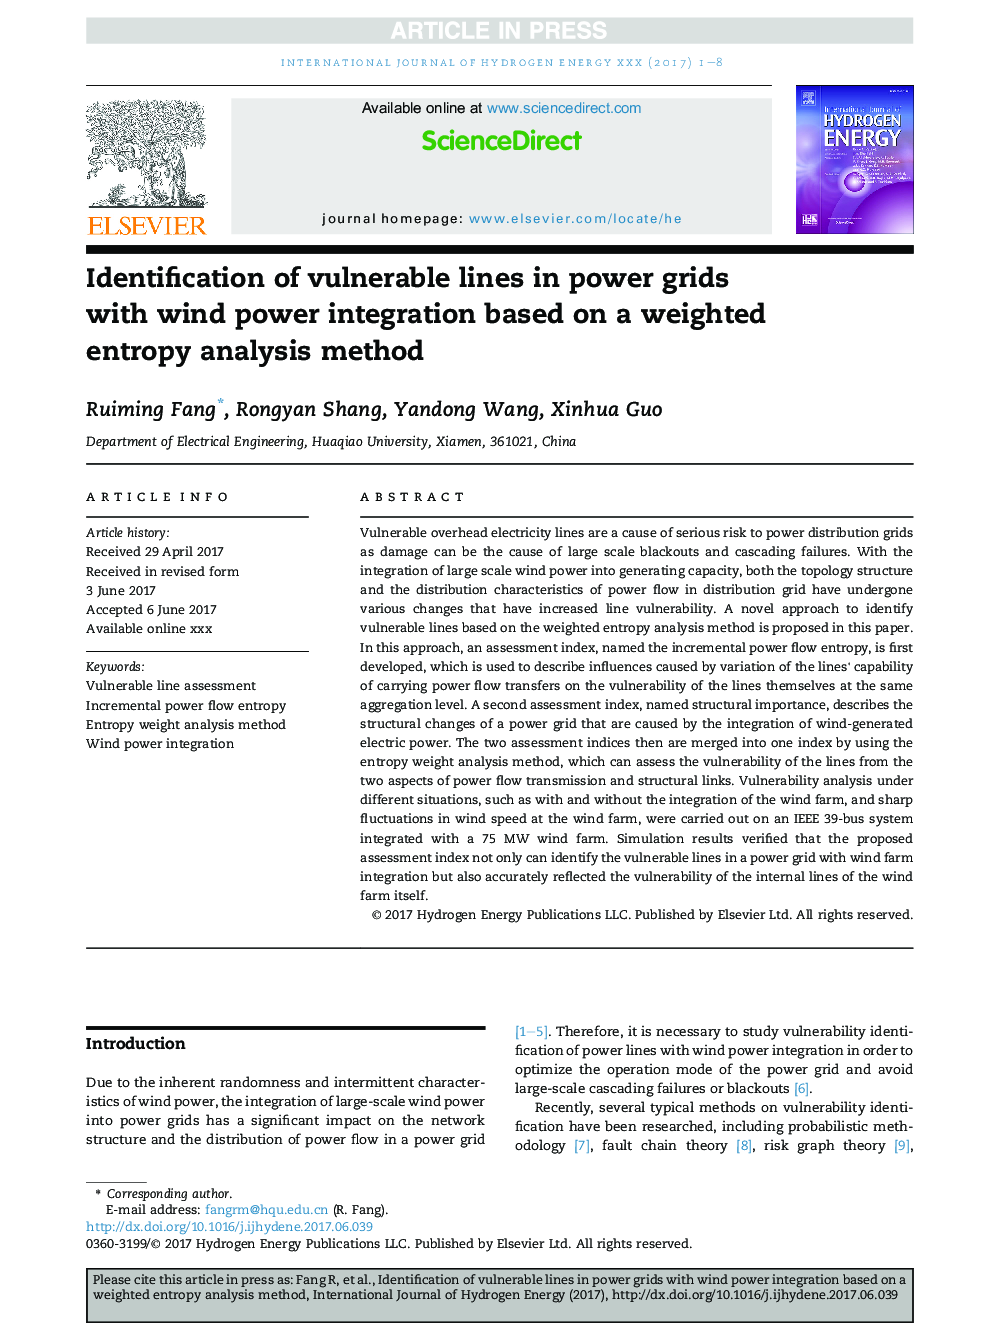 Identification of vulnerable lines in power grids with wind power integration based on a weighted entropy analysis method